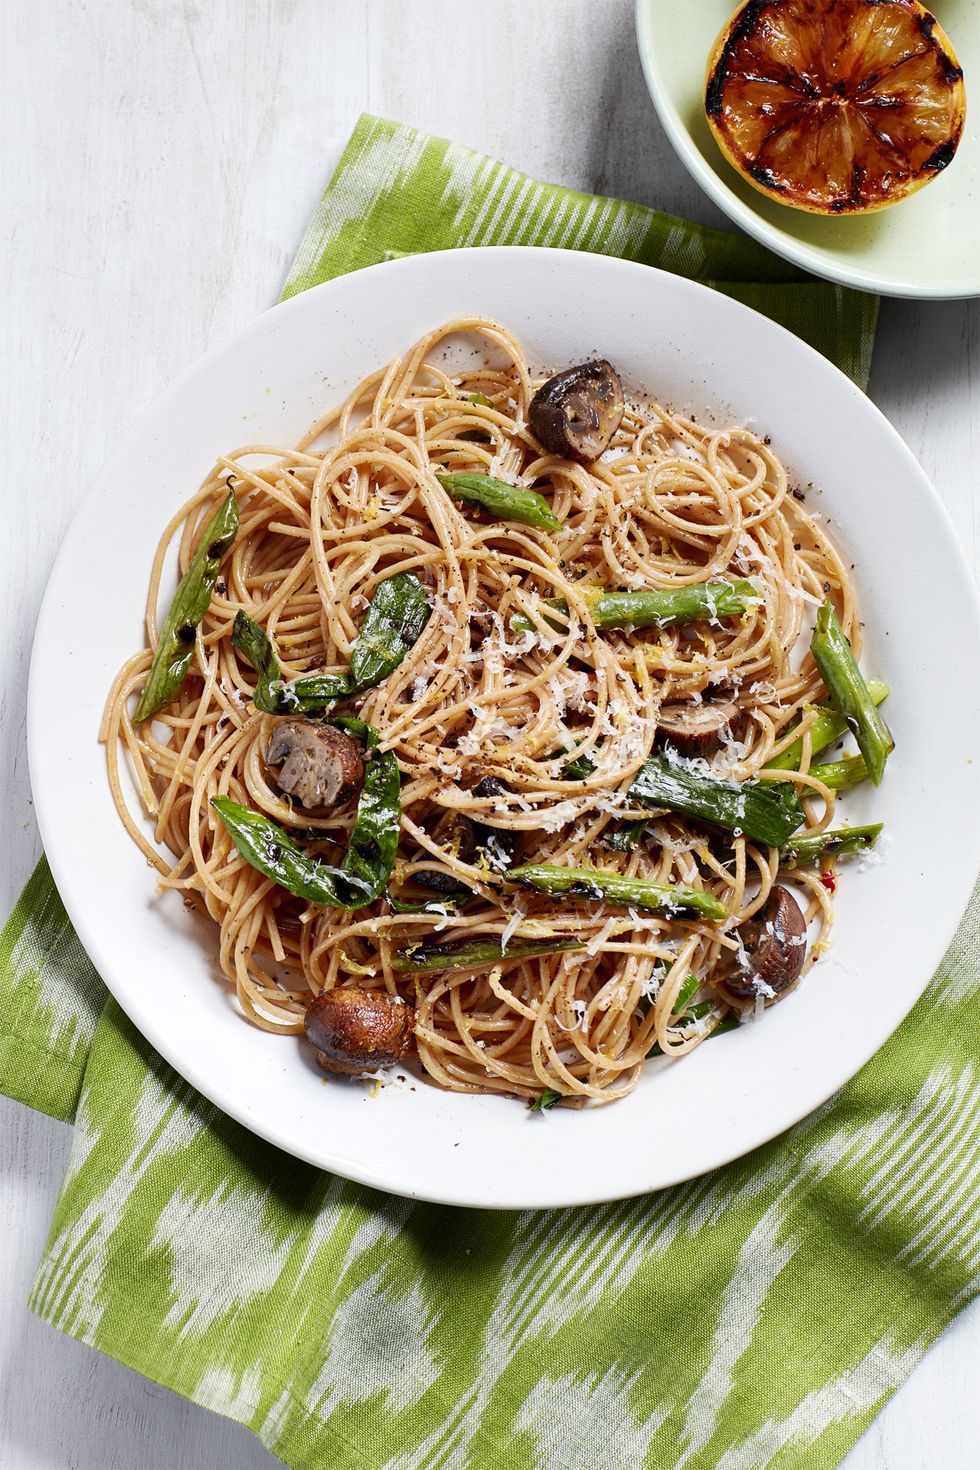 meatless dinner ideas - Spaghetti with Grilled Green Beans and Mushrooms